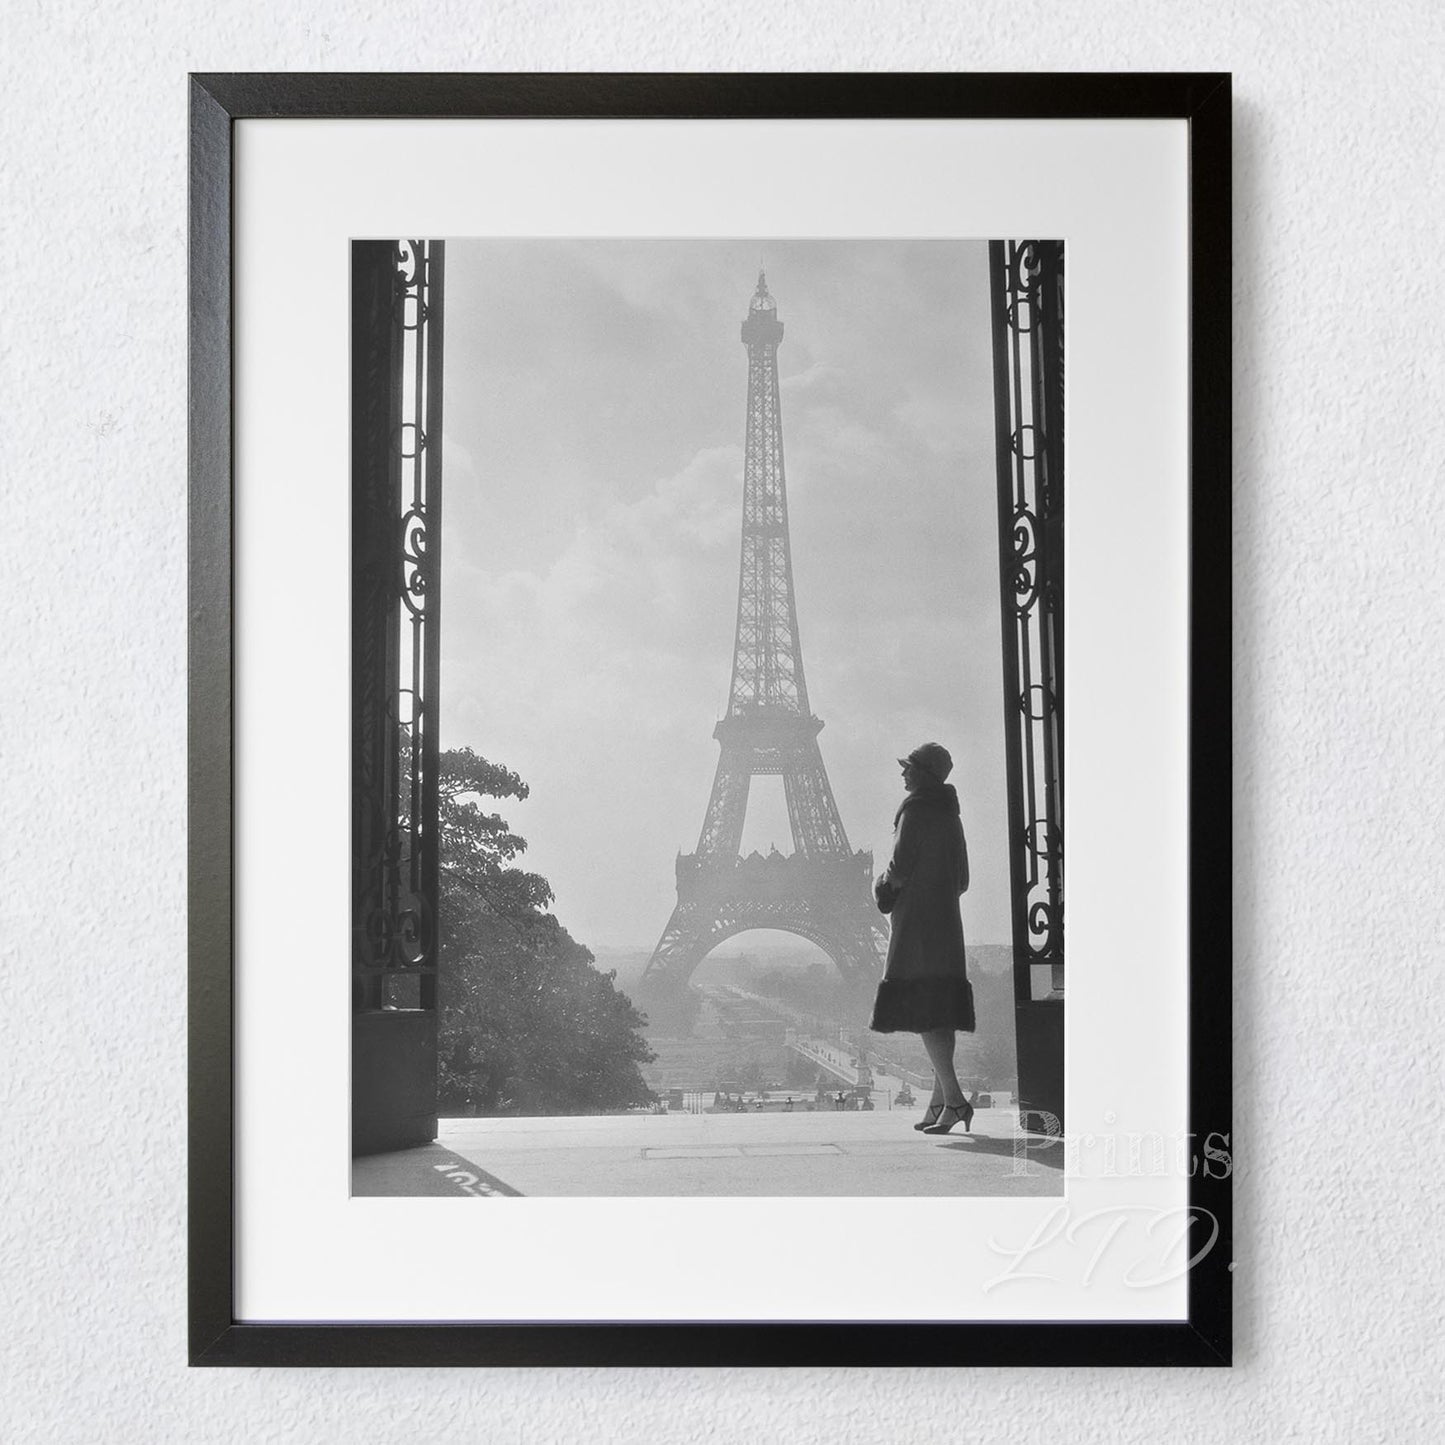 Woman by the Eiffel Tower, Paris 1920s